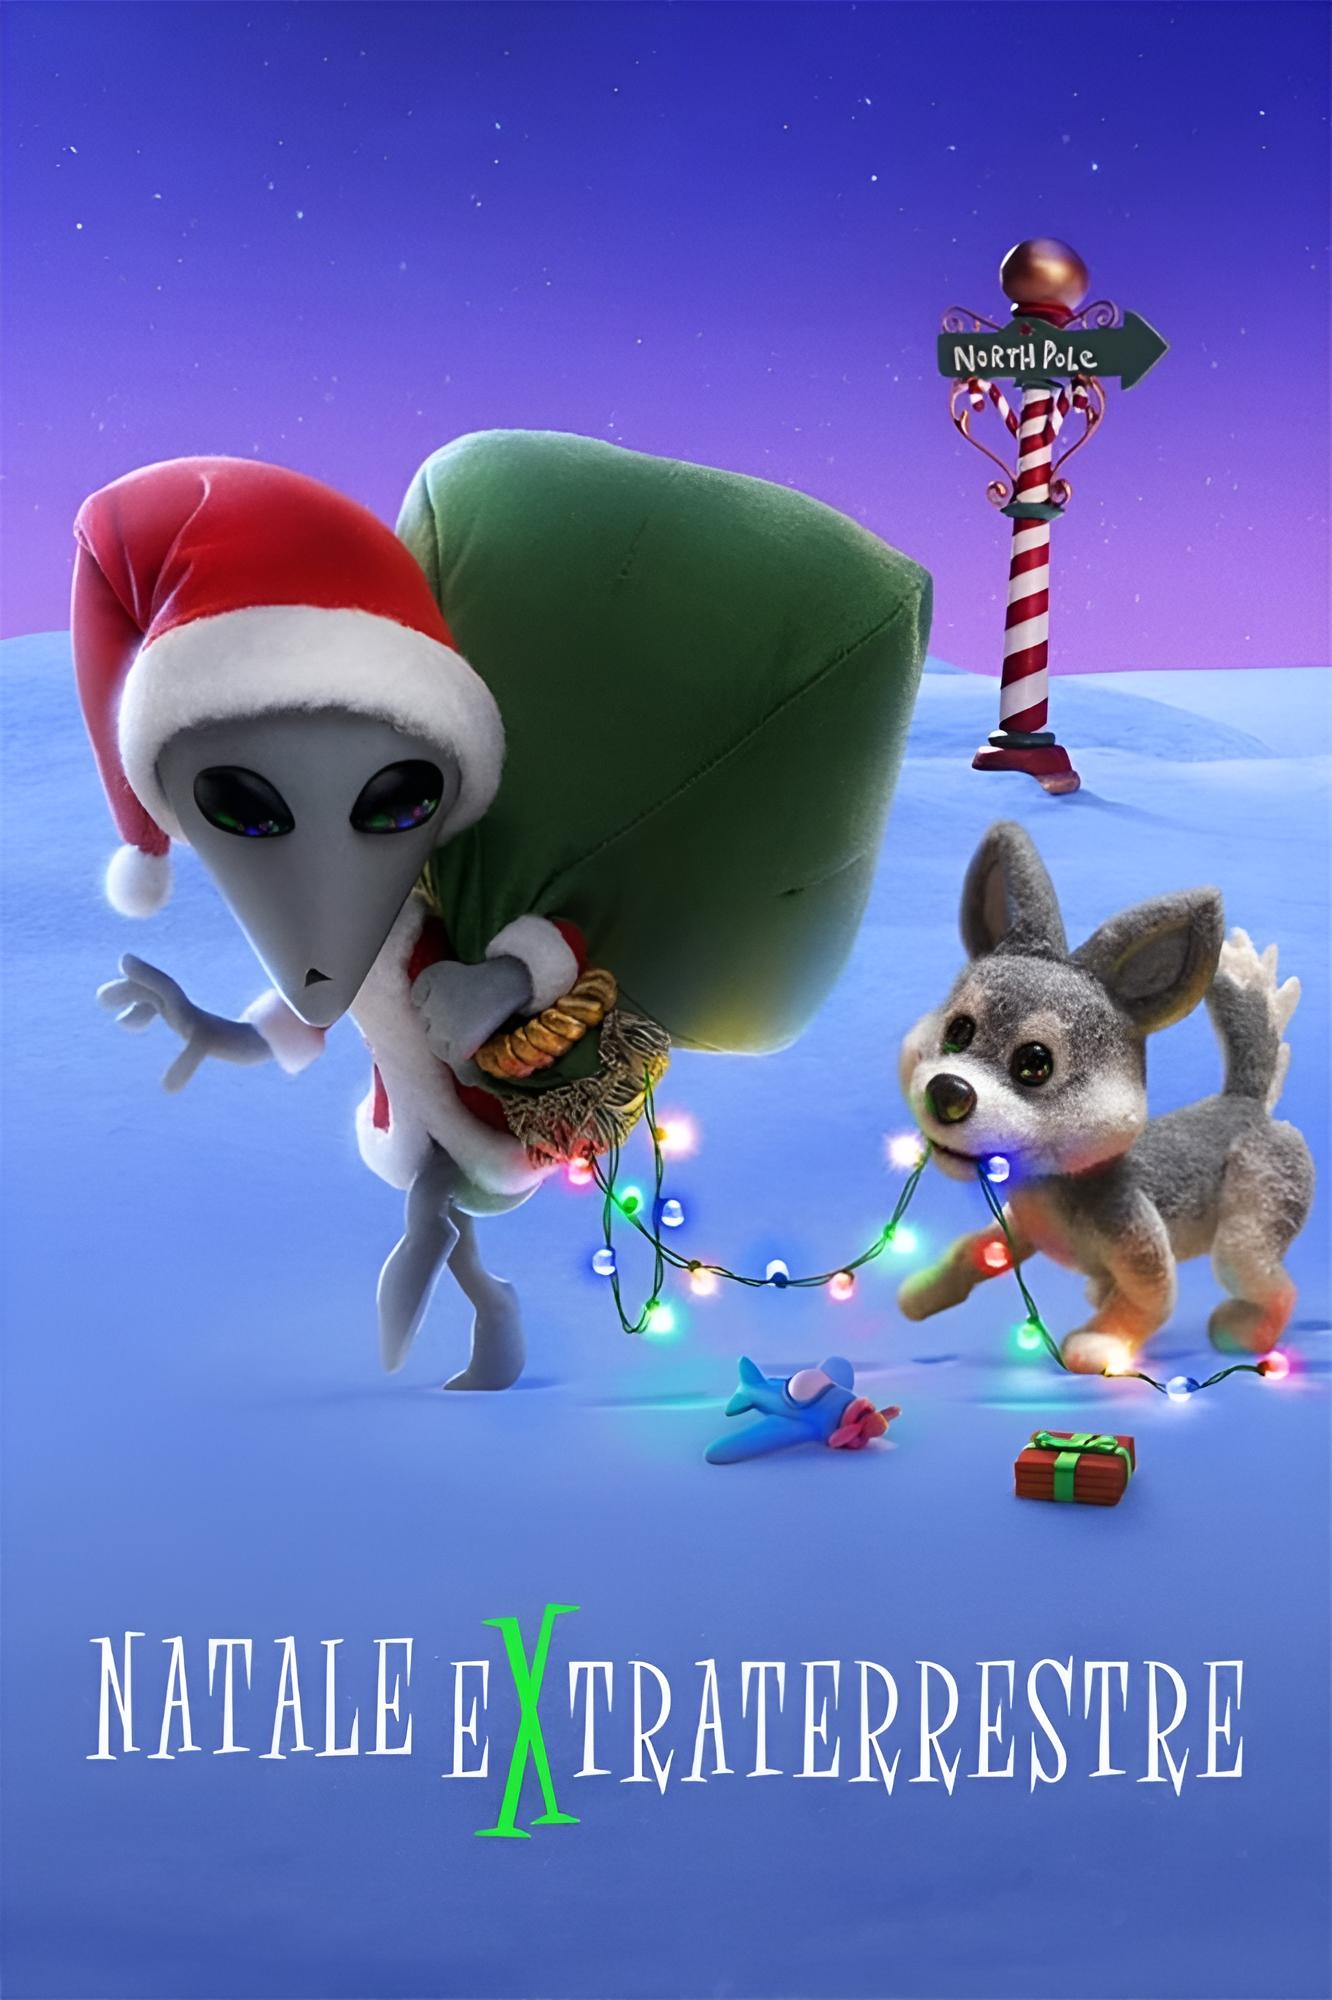 Natale eXtraterrestre [HD] (2020)